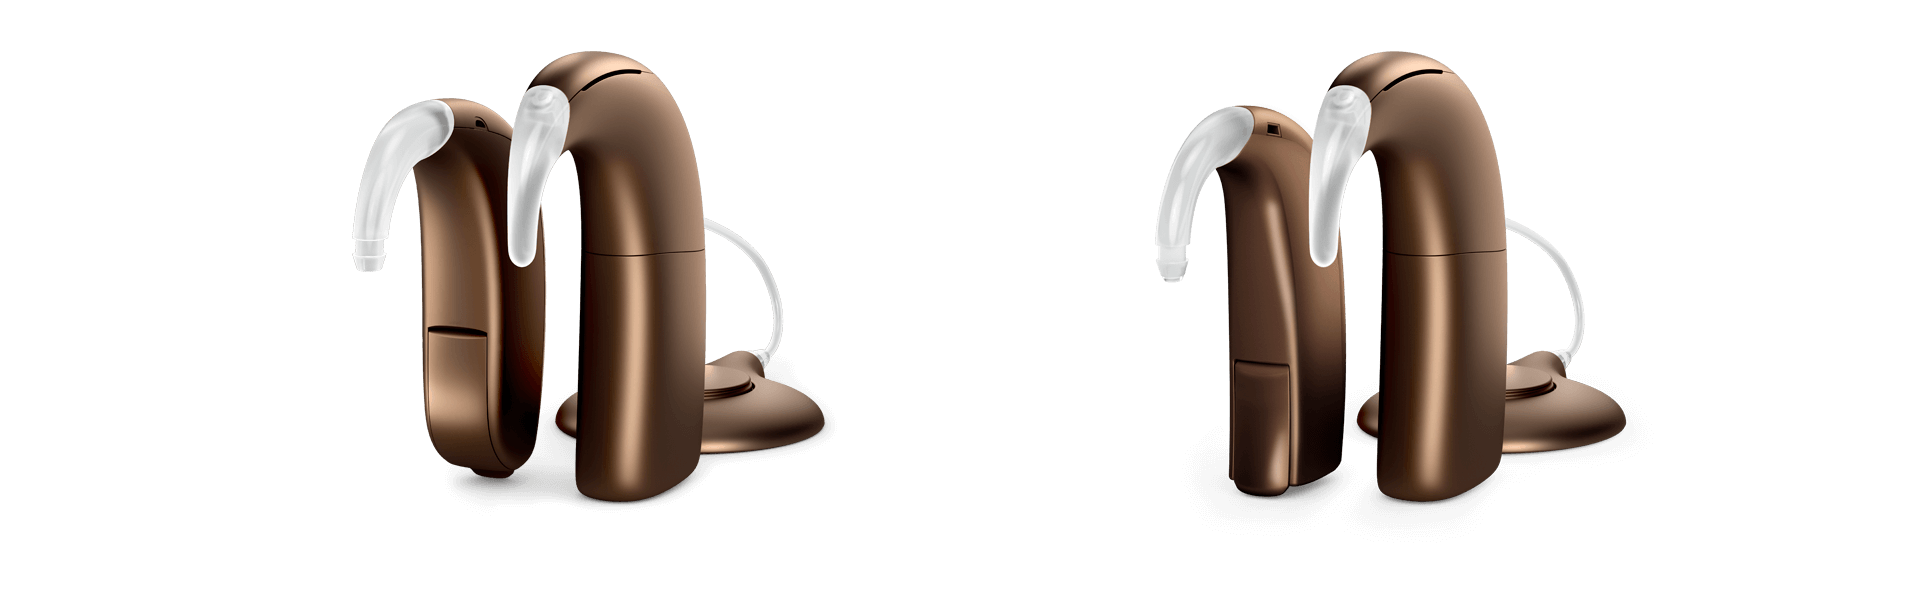 1920x600-color-chestnutbrown